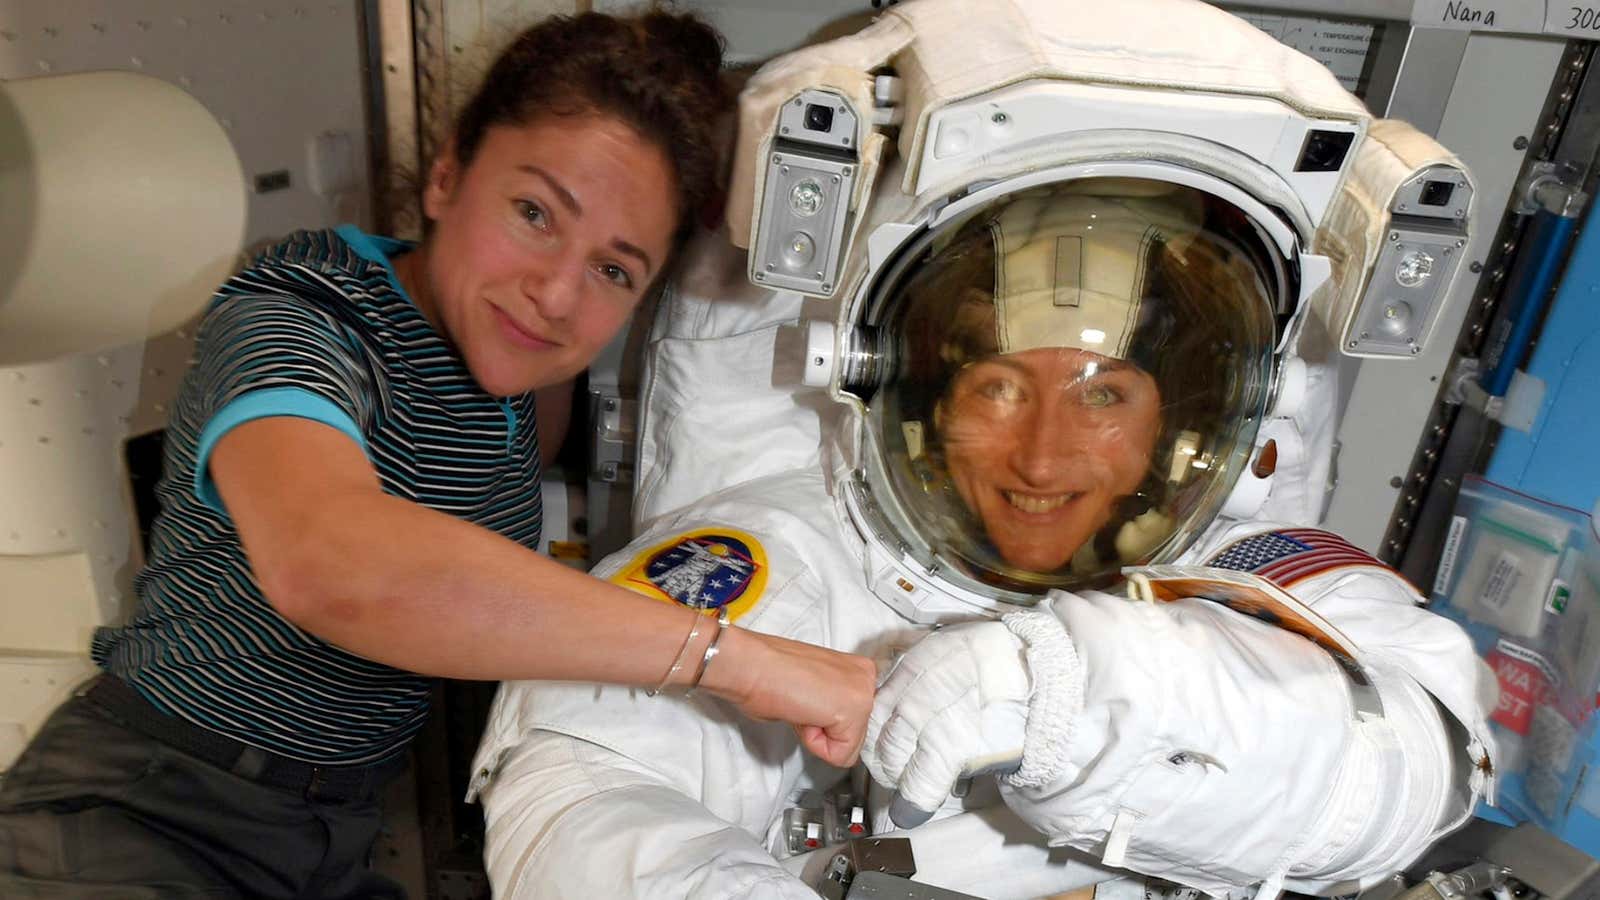 A lot of women can relate to astronauts Christina Koch, right, and, Jessica Meir.